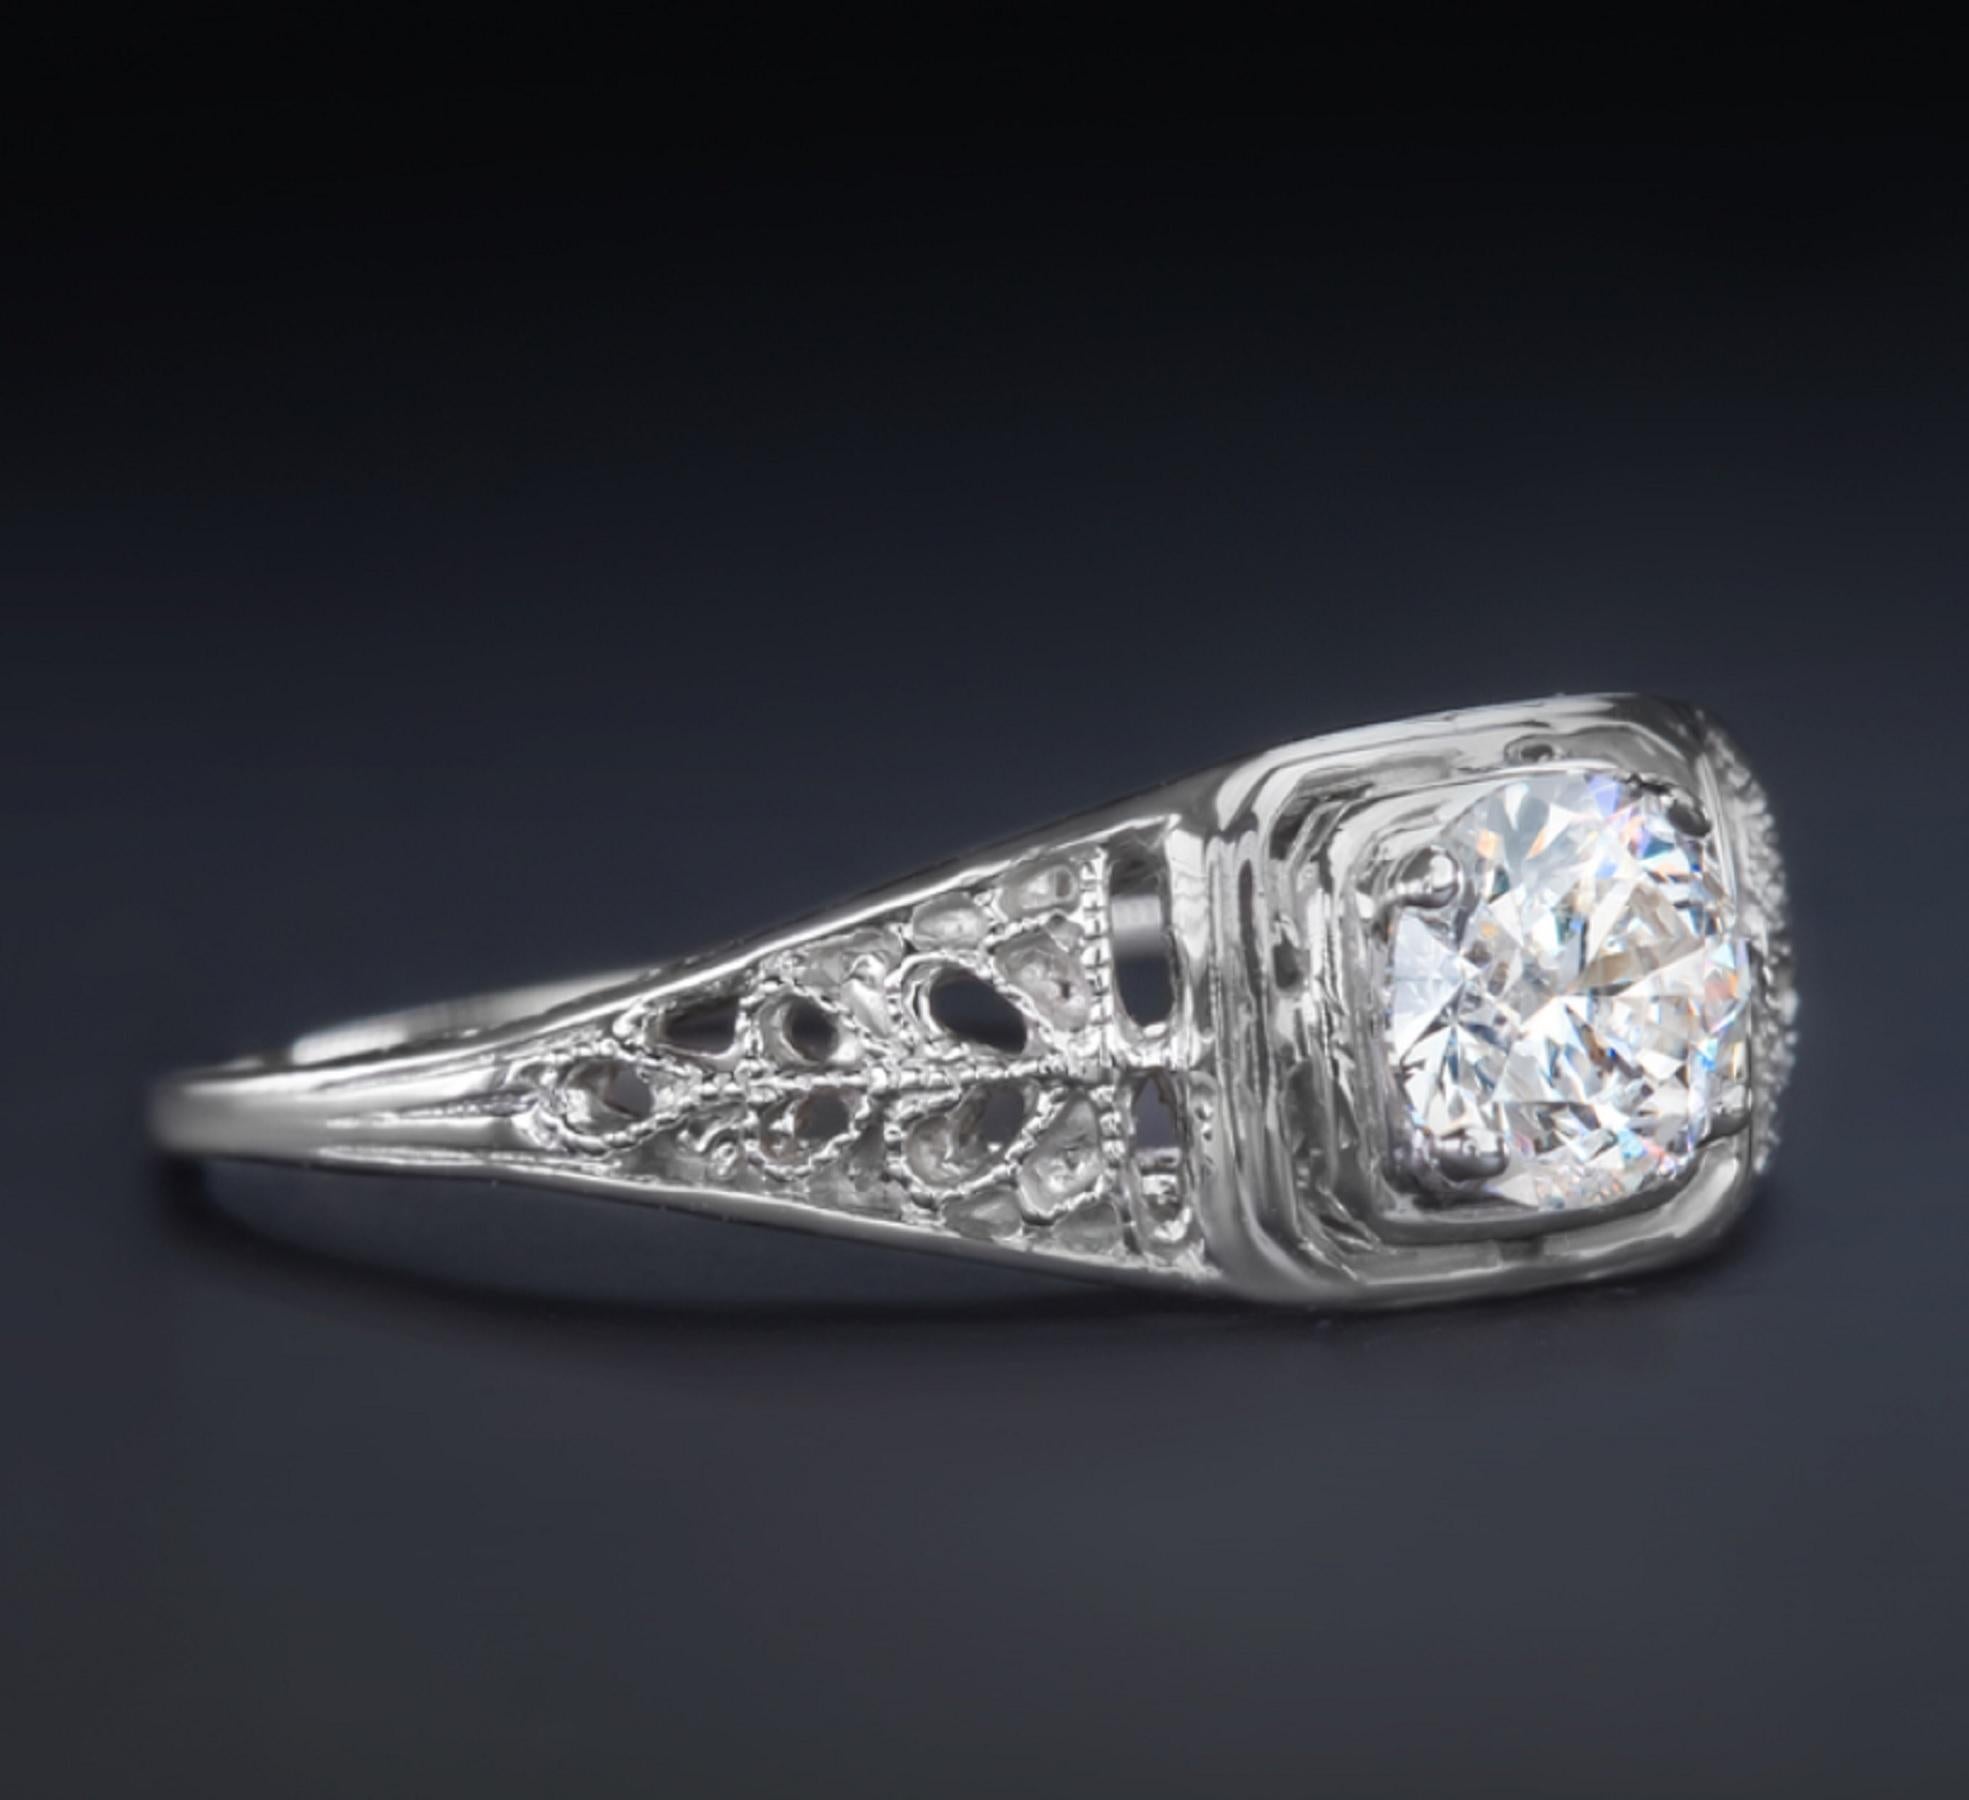 This gorgeous handmade engagement ring features a vibrant 0.50 carat round brilliant cut diamond set in a classically elegant design.

The diamond is beautifully white, eye clean, and dazzlingly brilliant! It is perfectly complemented by the utterly